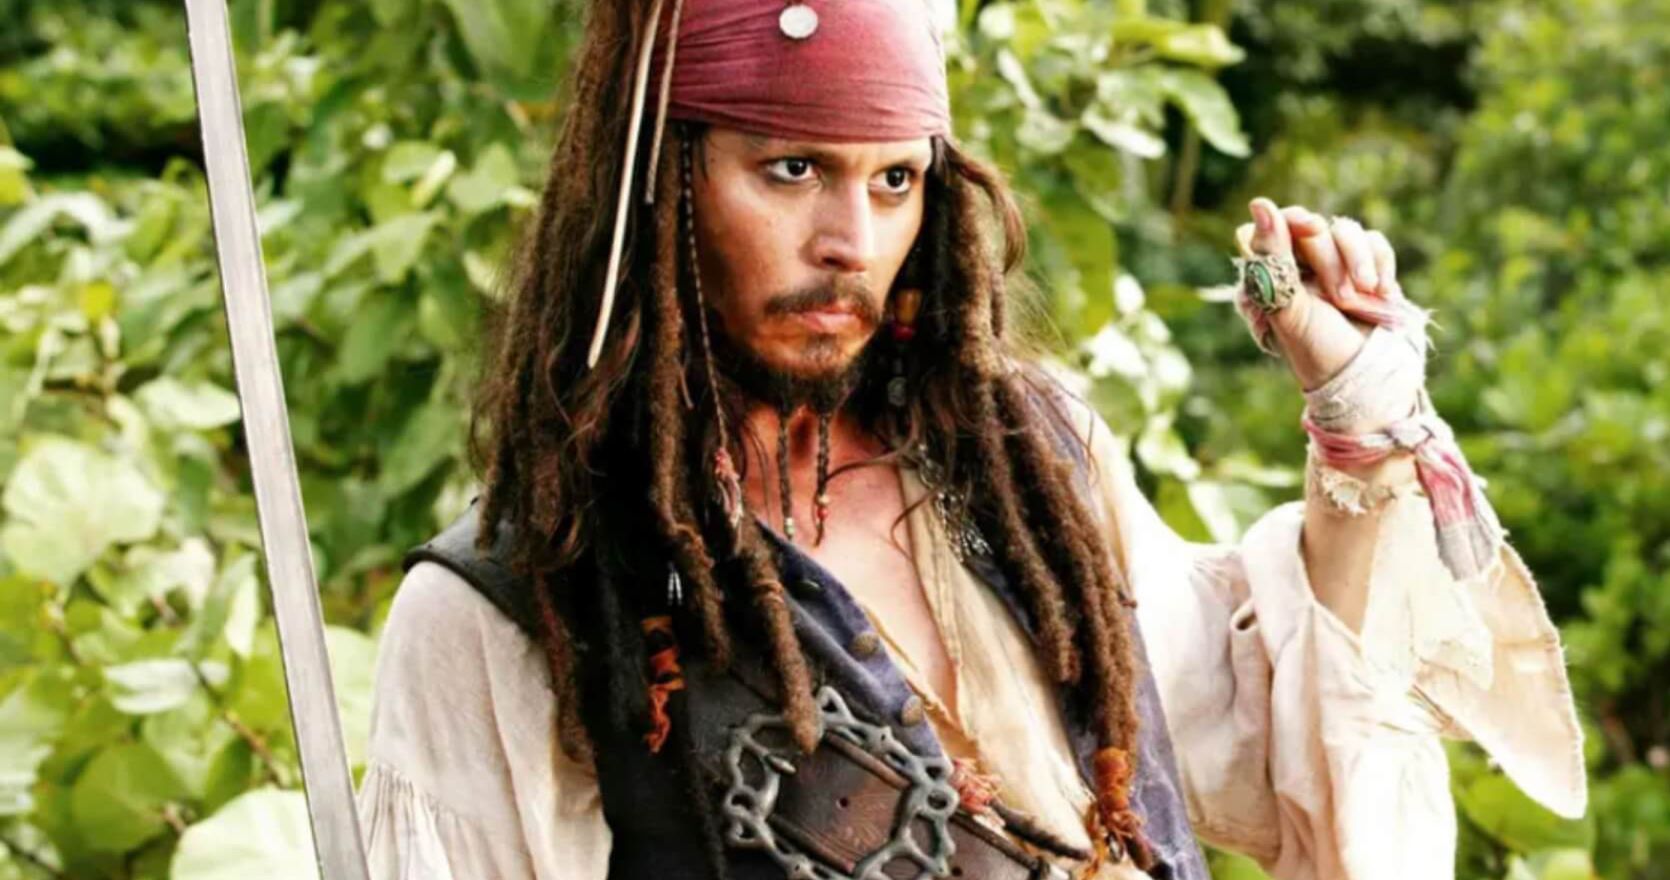 Johnny Depp Doesn't Miss the Pirates Franchise: I Travel with Captain Jack in My Suitcase